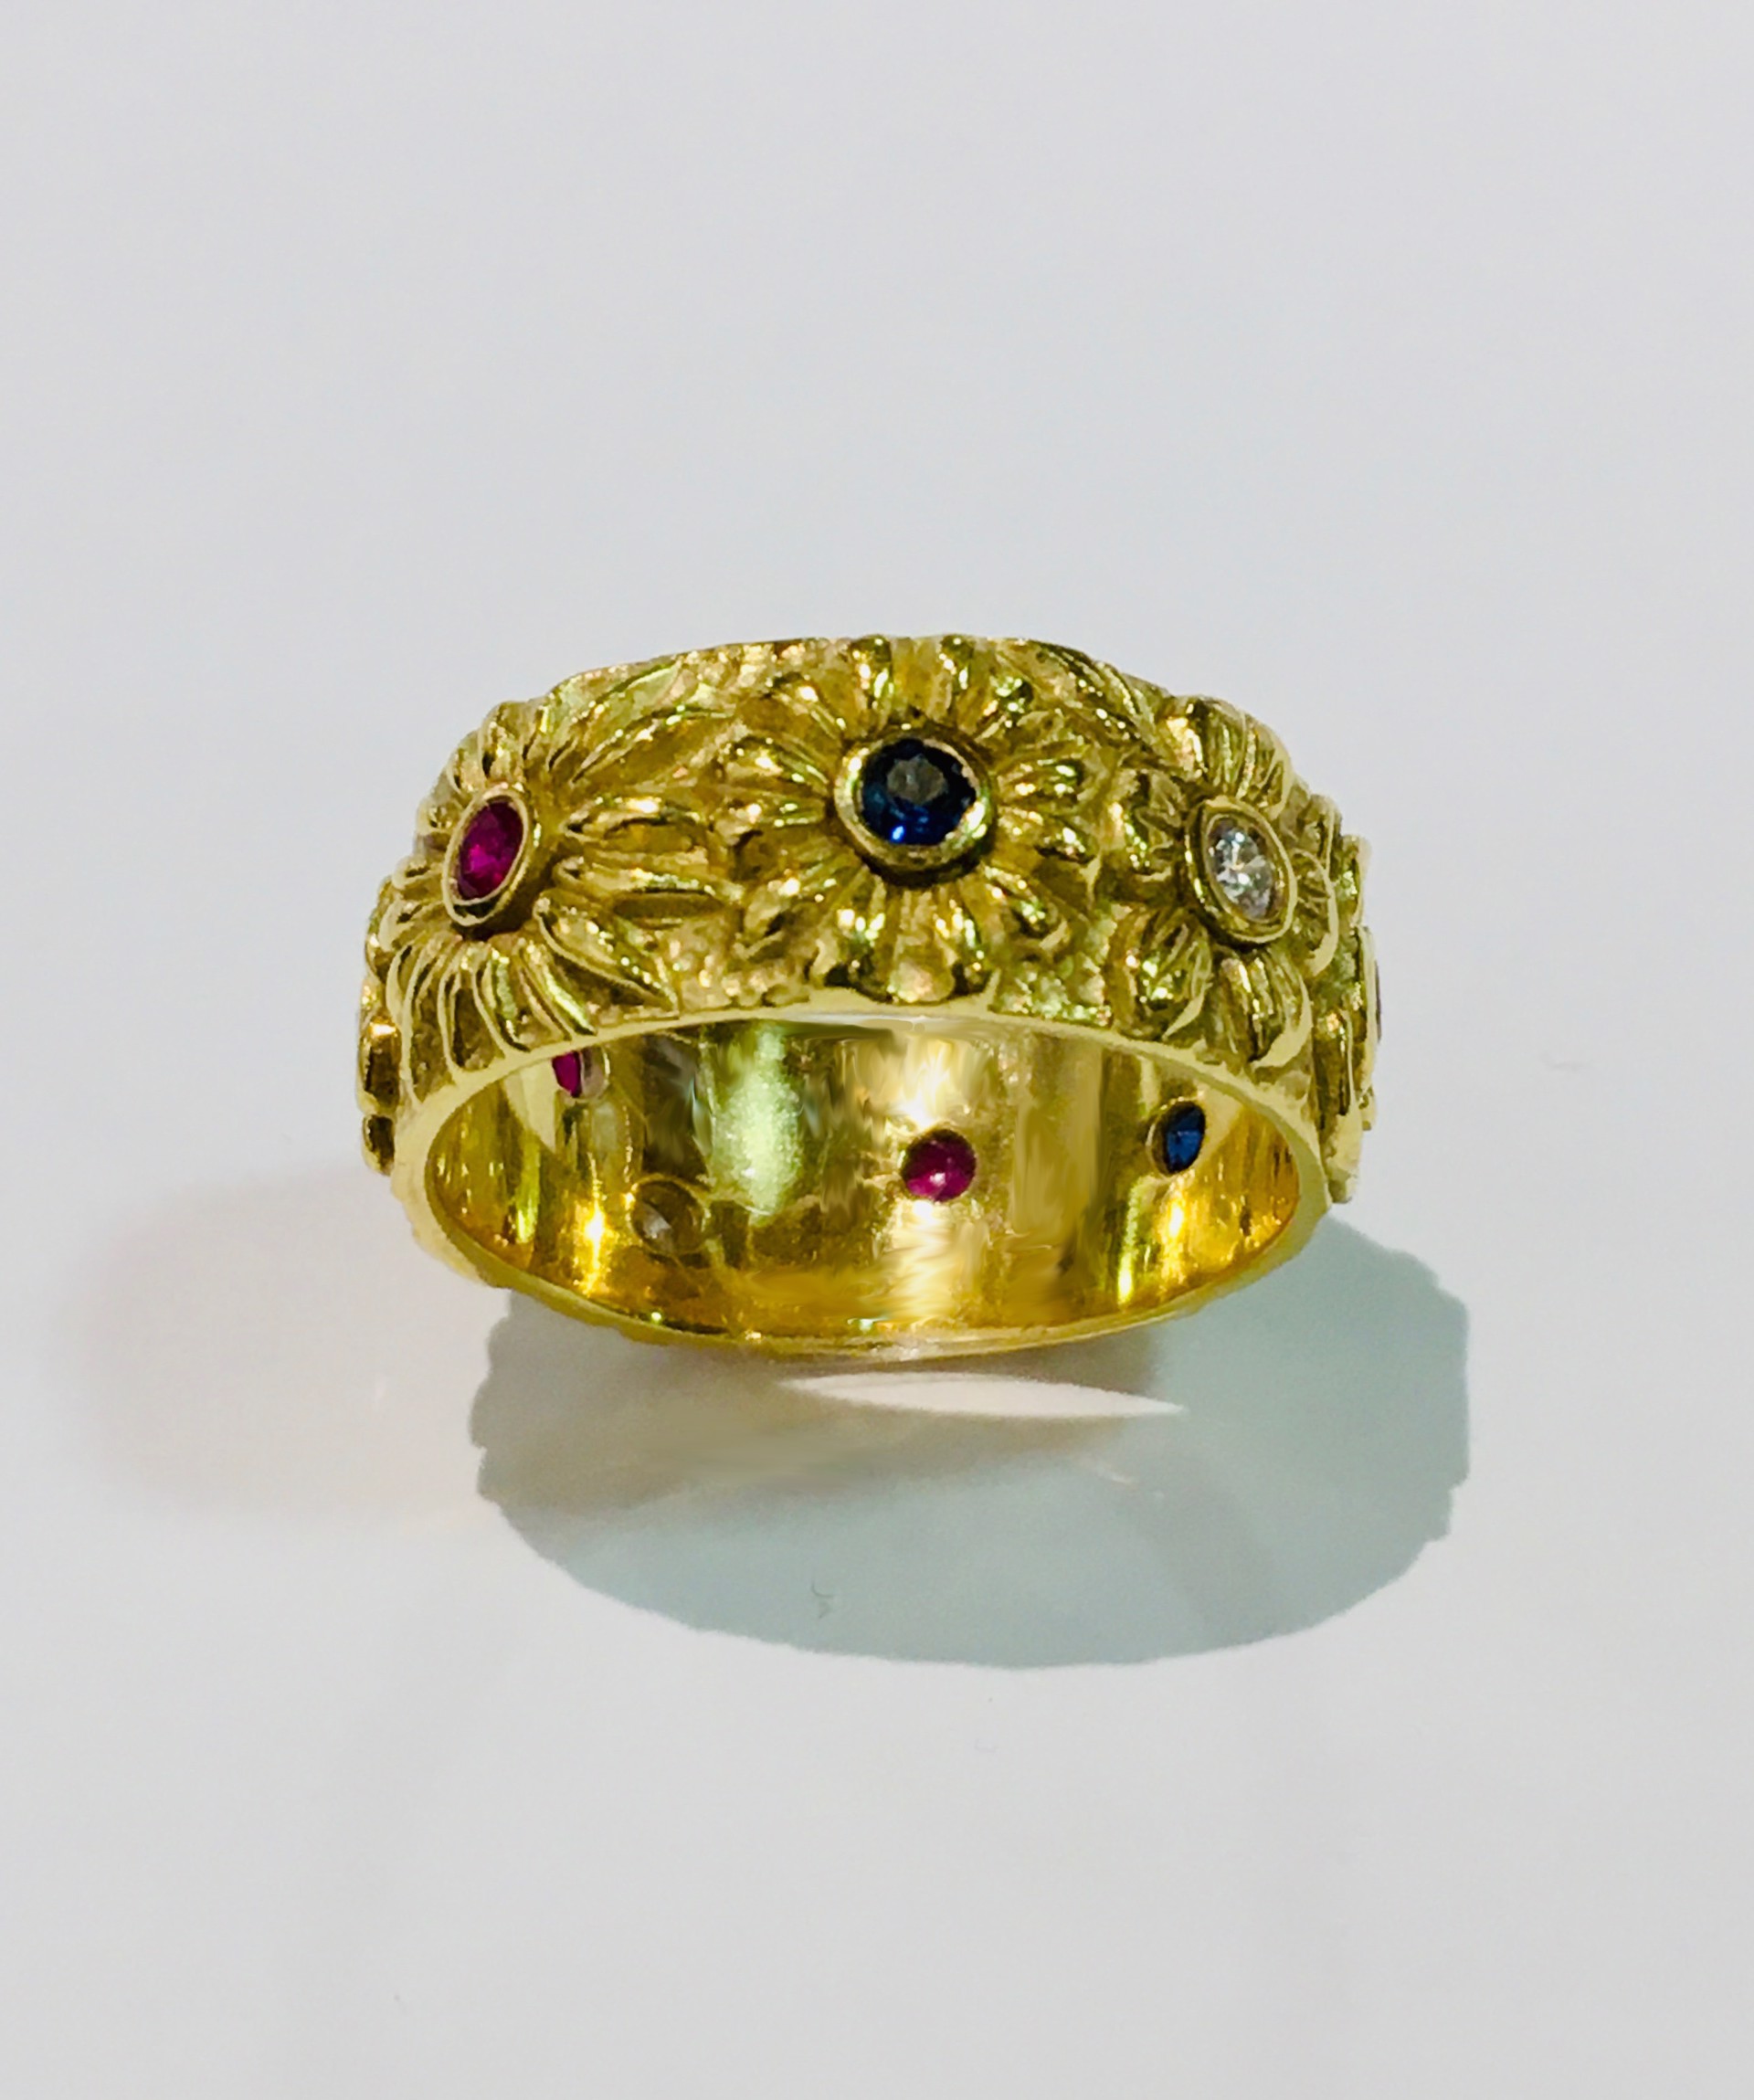 Sapphires, Garnets, and Diamonds in 18kt Yellow Gold, Floral Thick Band Ring by DIANA HEIMANN